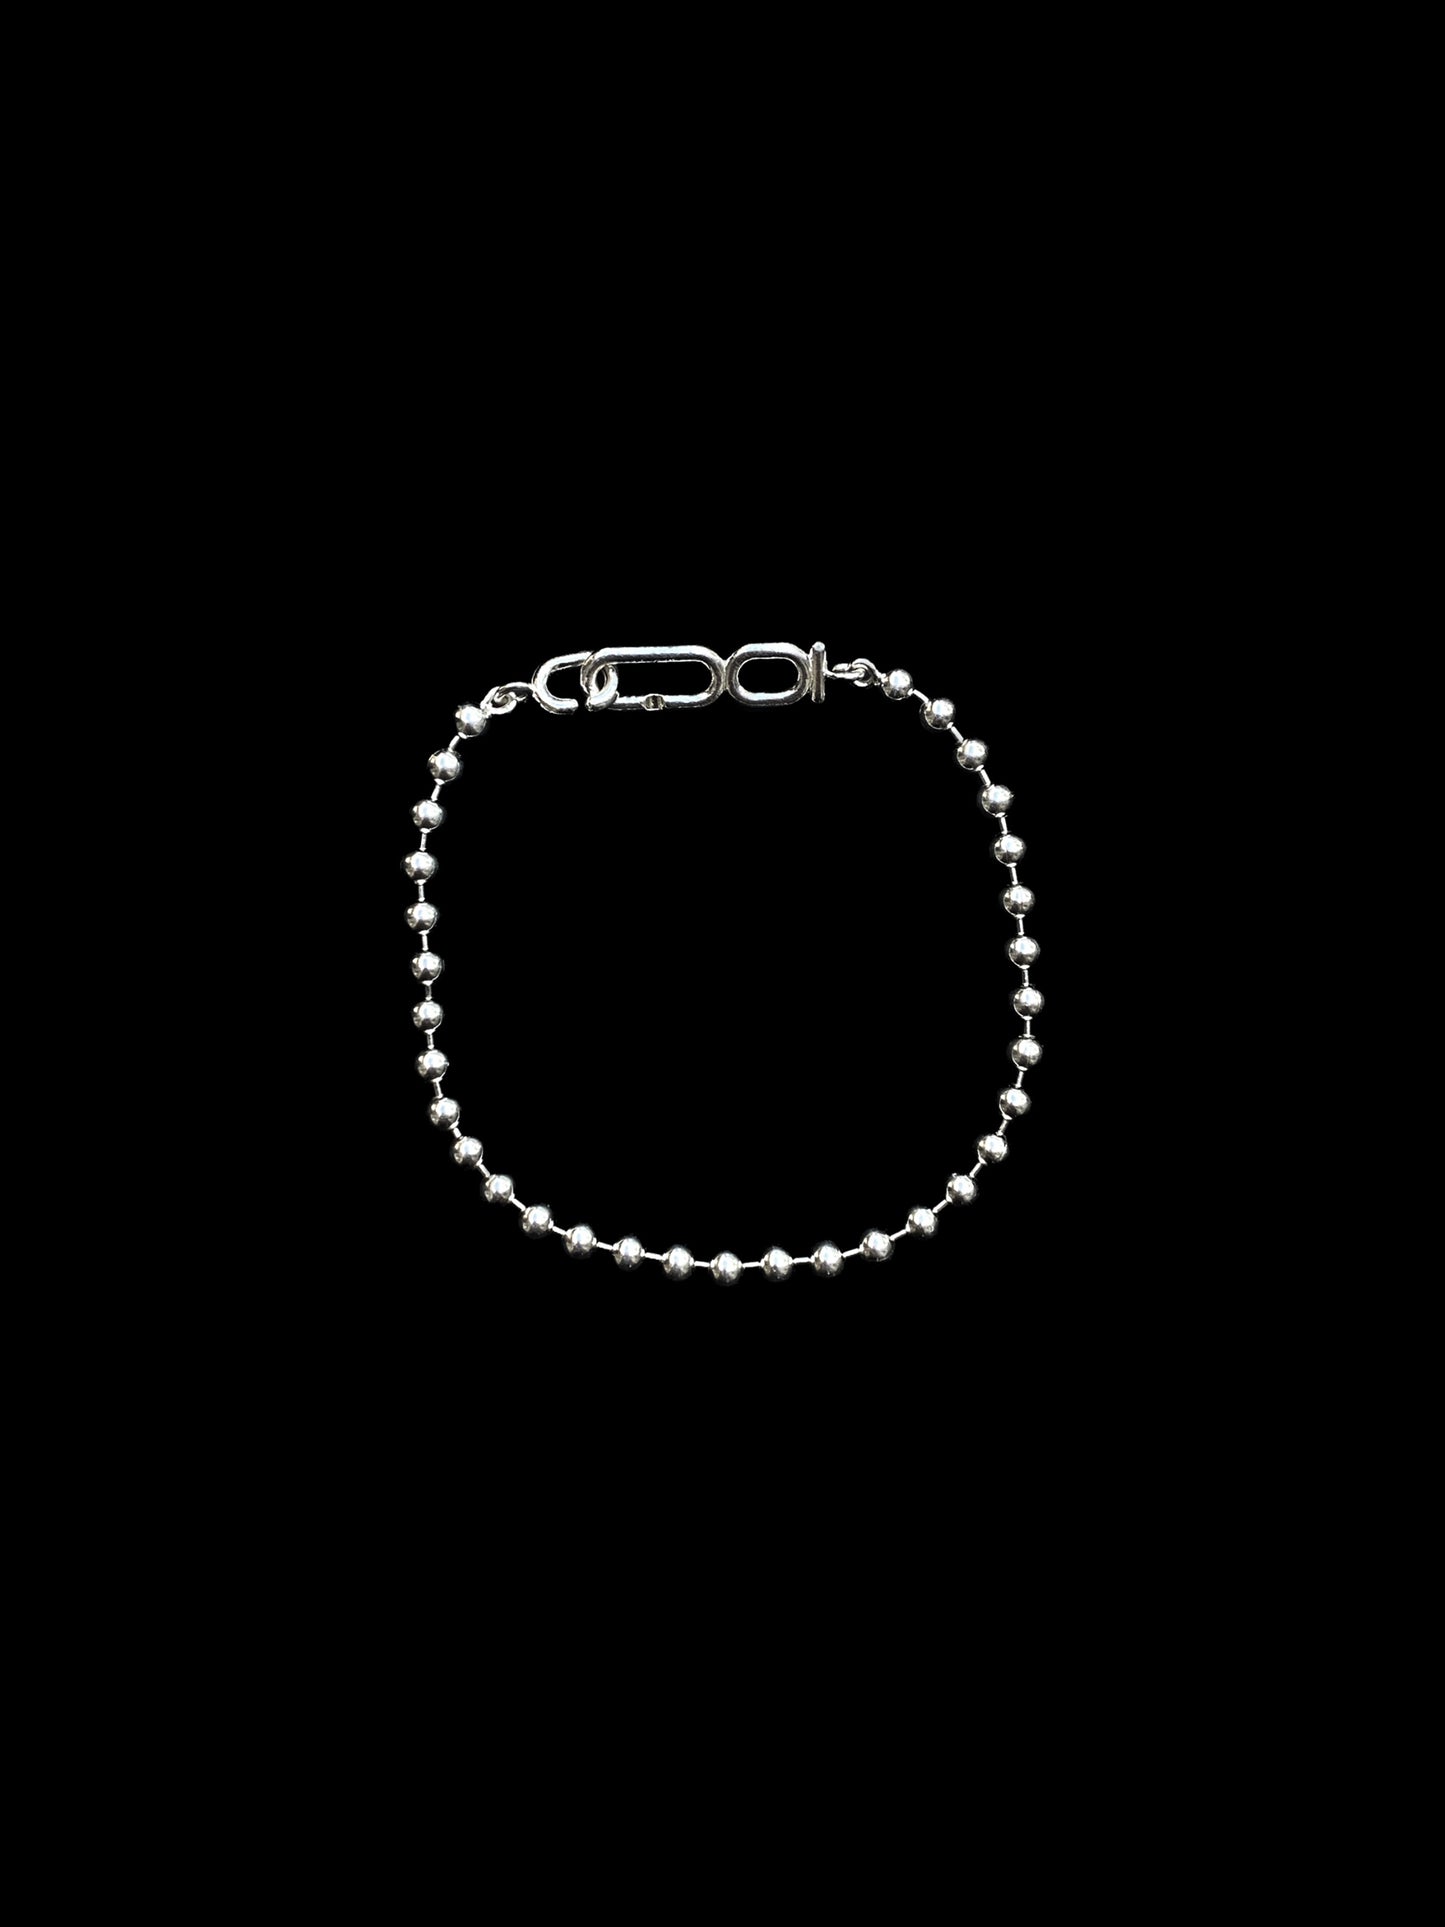 Ball chain bracelet with monogram clasp by Coming Age jewellery studio in Montreal